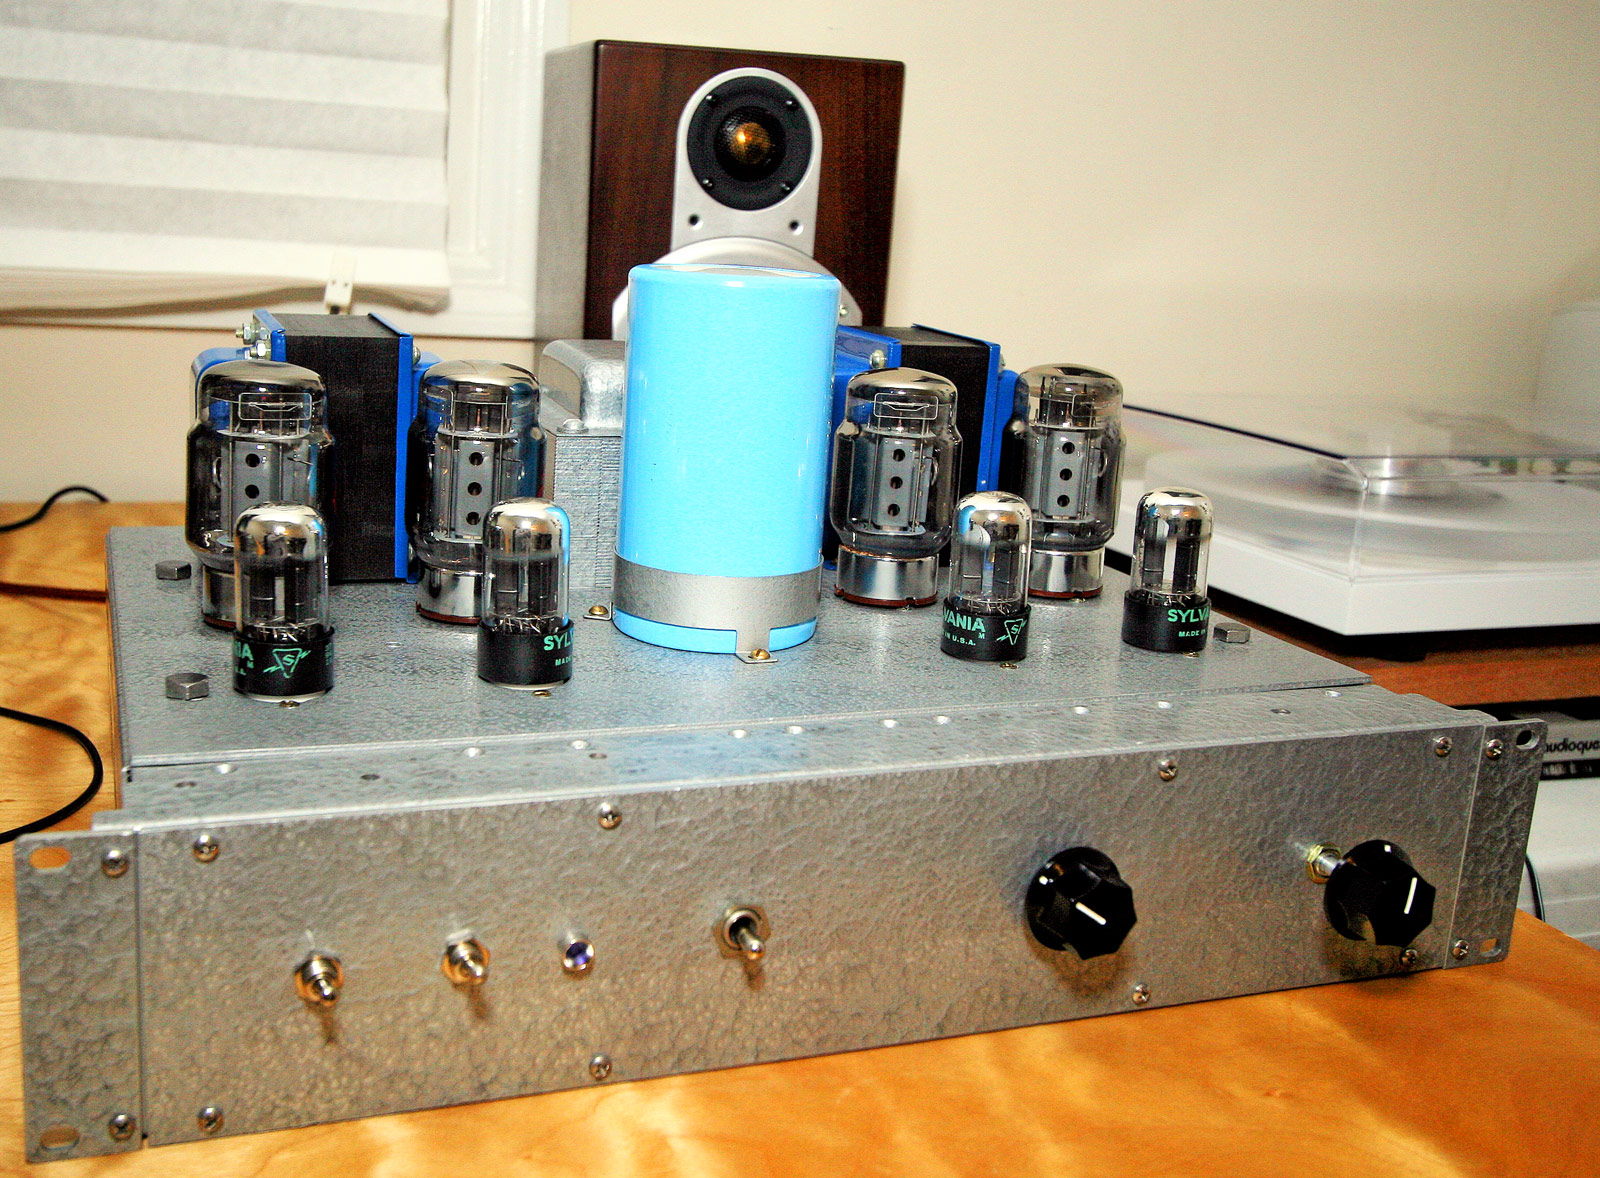 Reference Beta Hand Built Made in USA Vacuum Tube Amplifier by Sean Rose